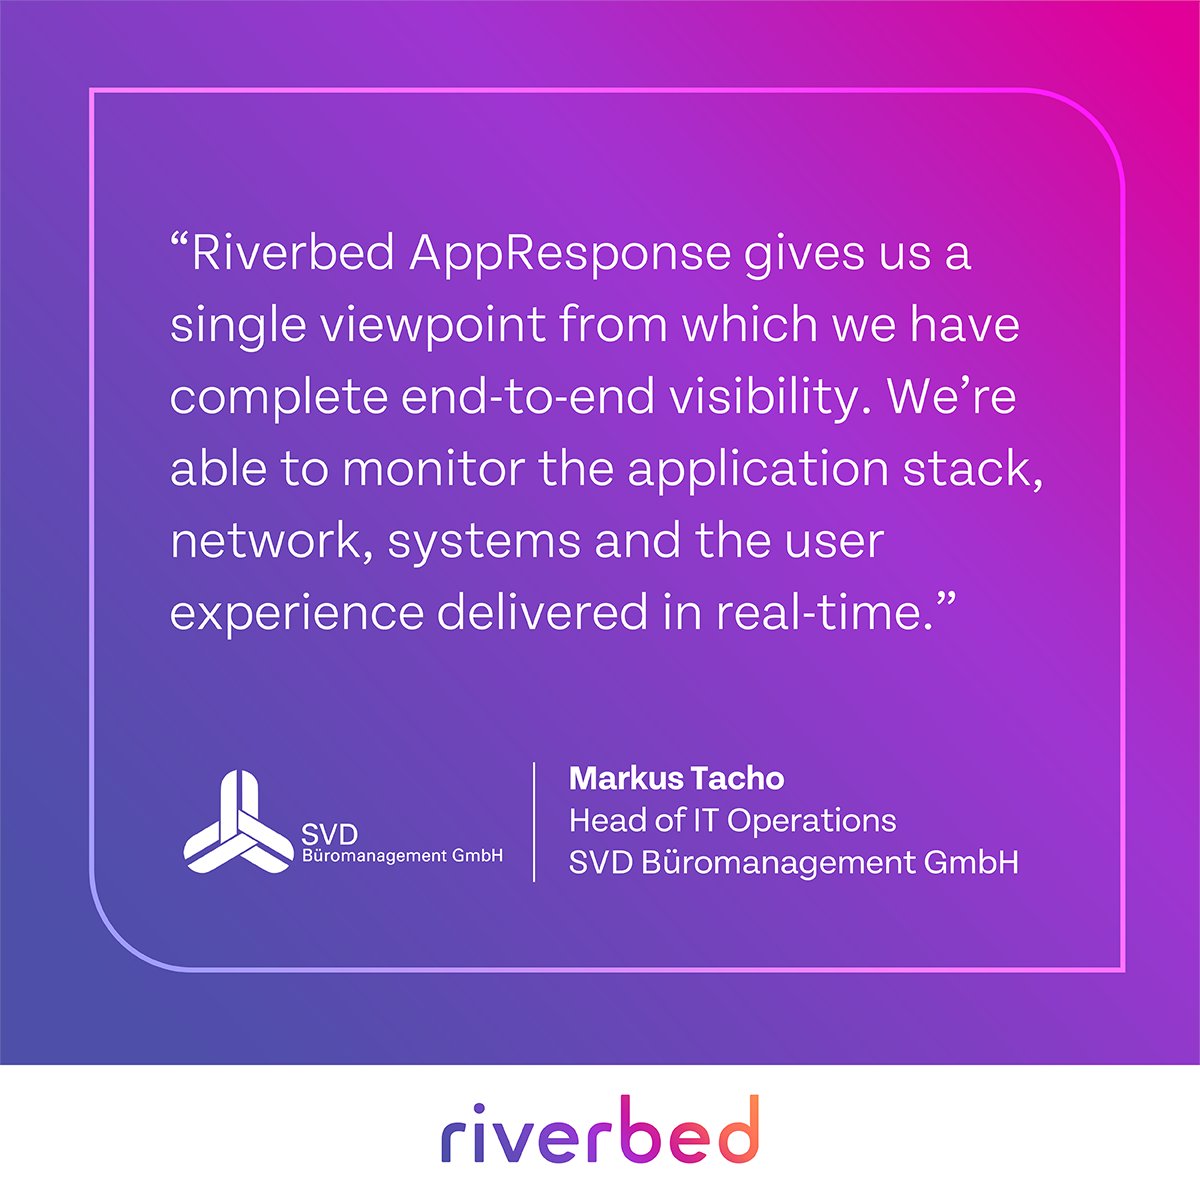 SVD Büromanagement GmbH improved its visibility into applications, networks and systems–completely transforming its #customerexperience! 🙌 Here’s how Riverbed AppResponse helped them in this journey: rvbd.ly/40dAj11  

#ApplicationPerformance #NetworkVisibility